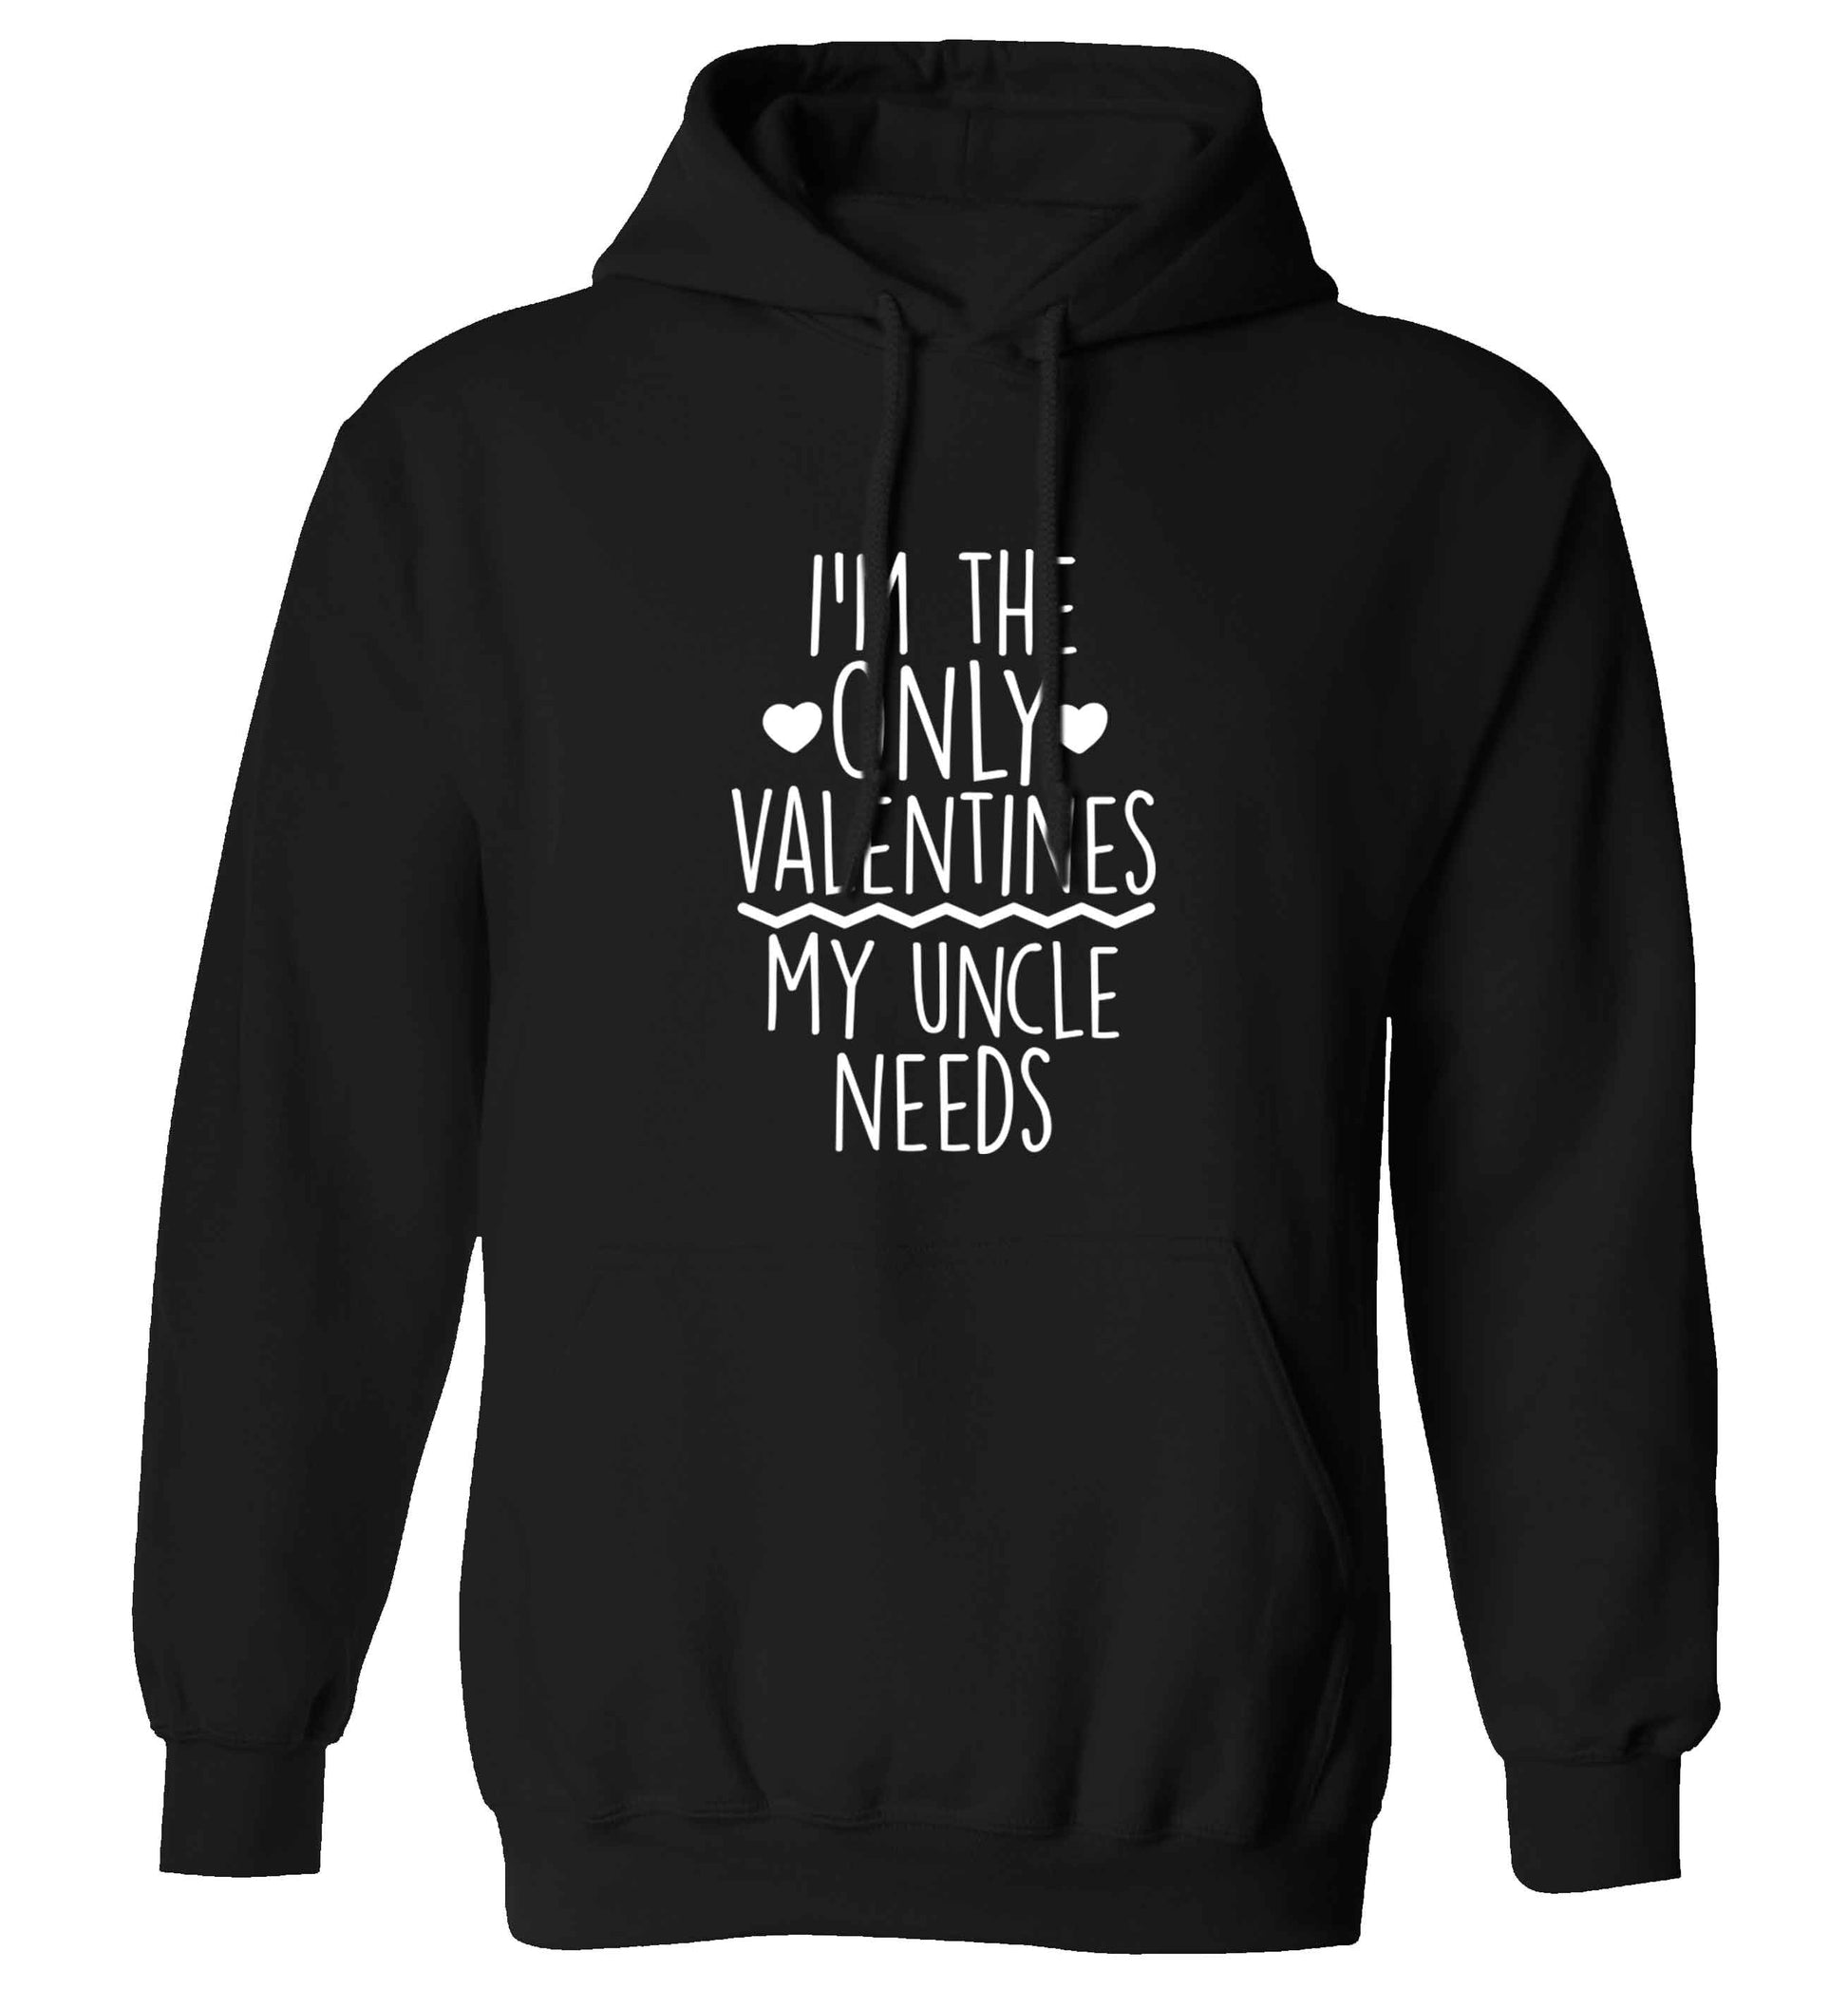 I'm the only valentines my uncle needs adults unisex black hoodie 2XL